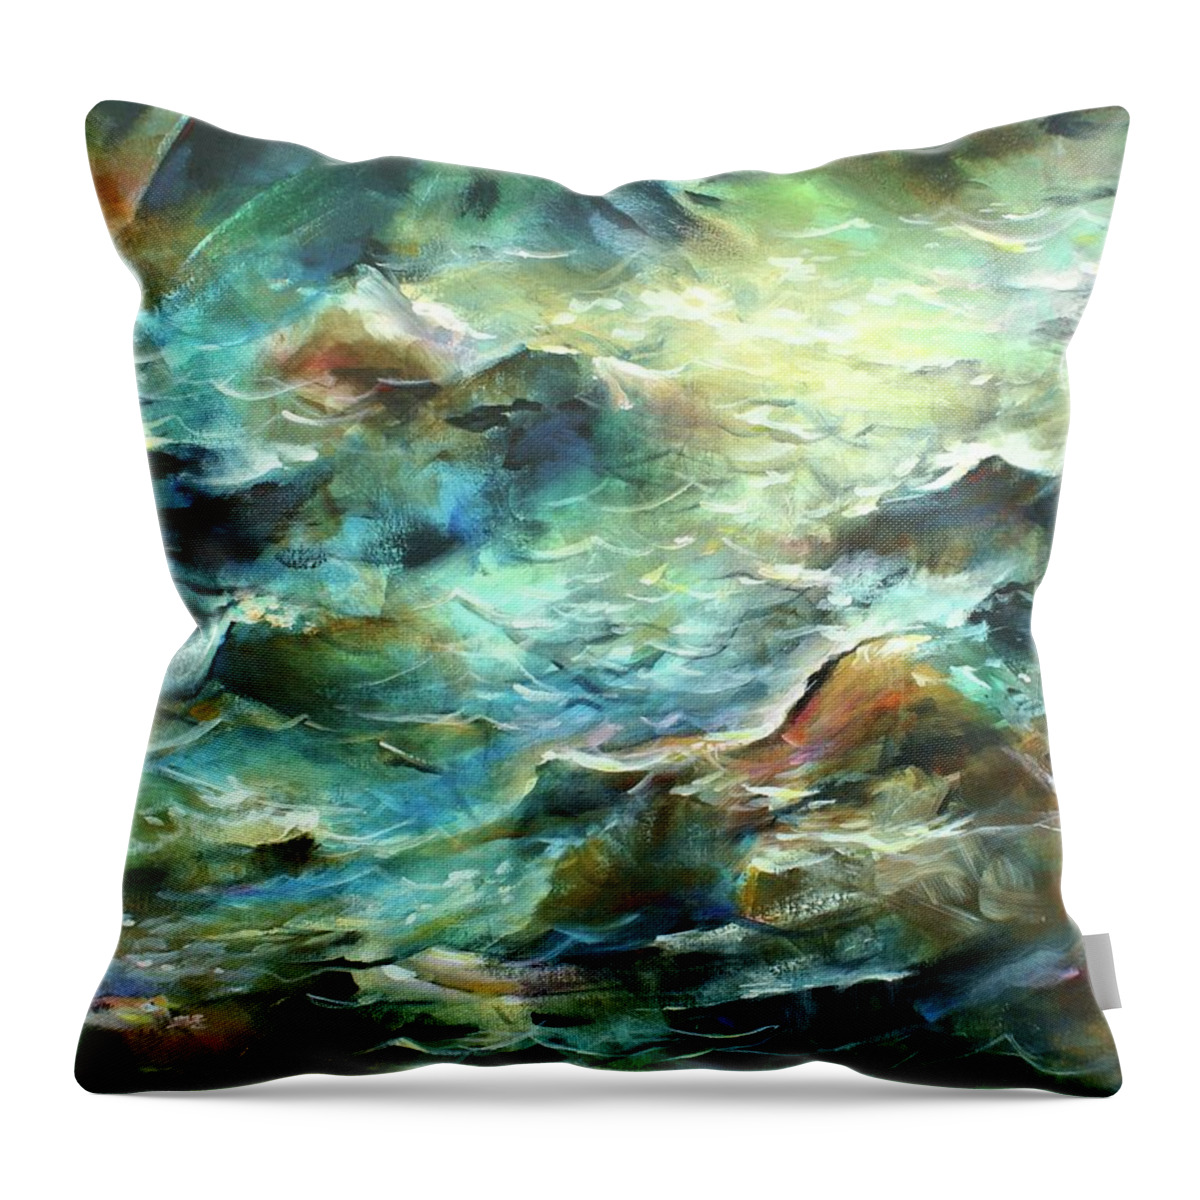 Green Blue Throw Pillow featuring the painting Endless Rift by Michael Lang